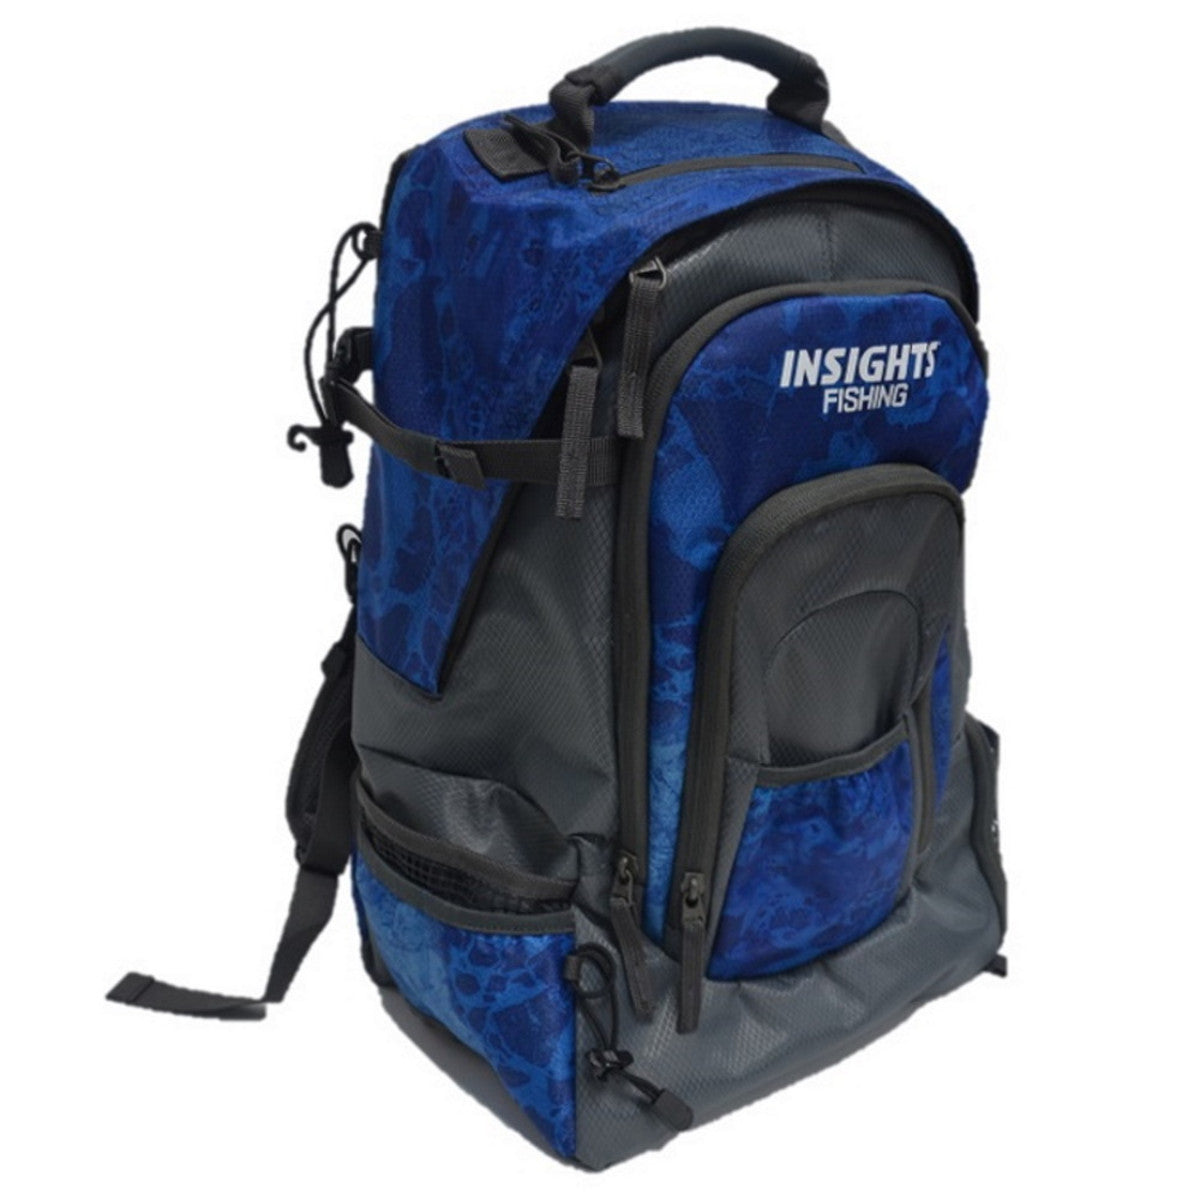 FROGG TOGGS i3 Fishing Backpack